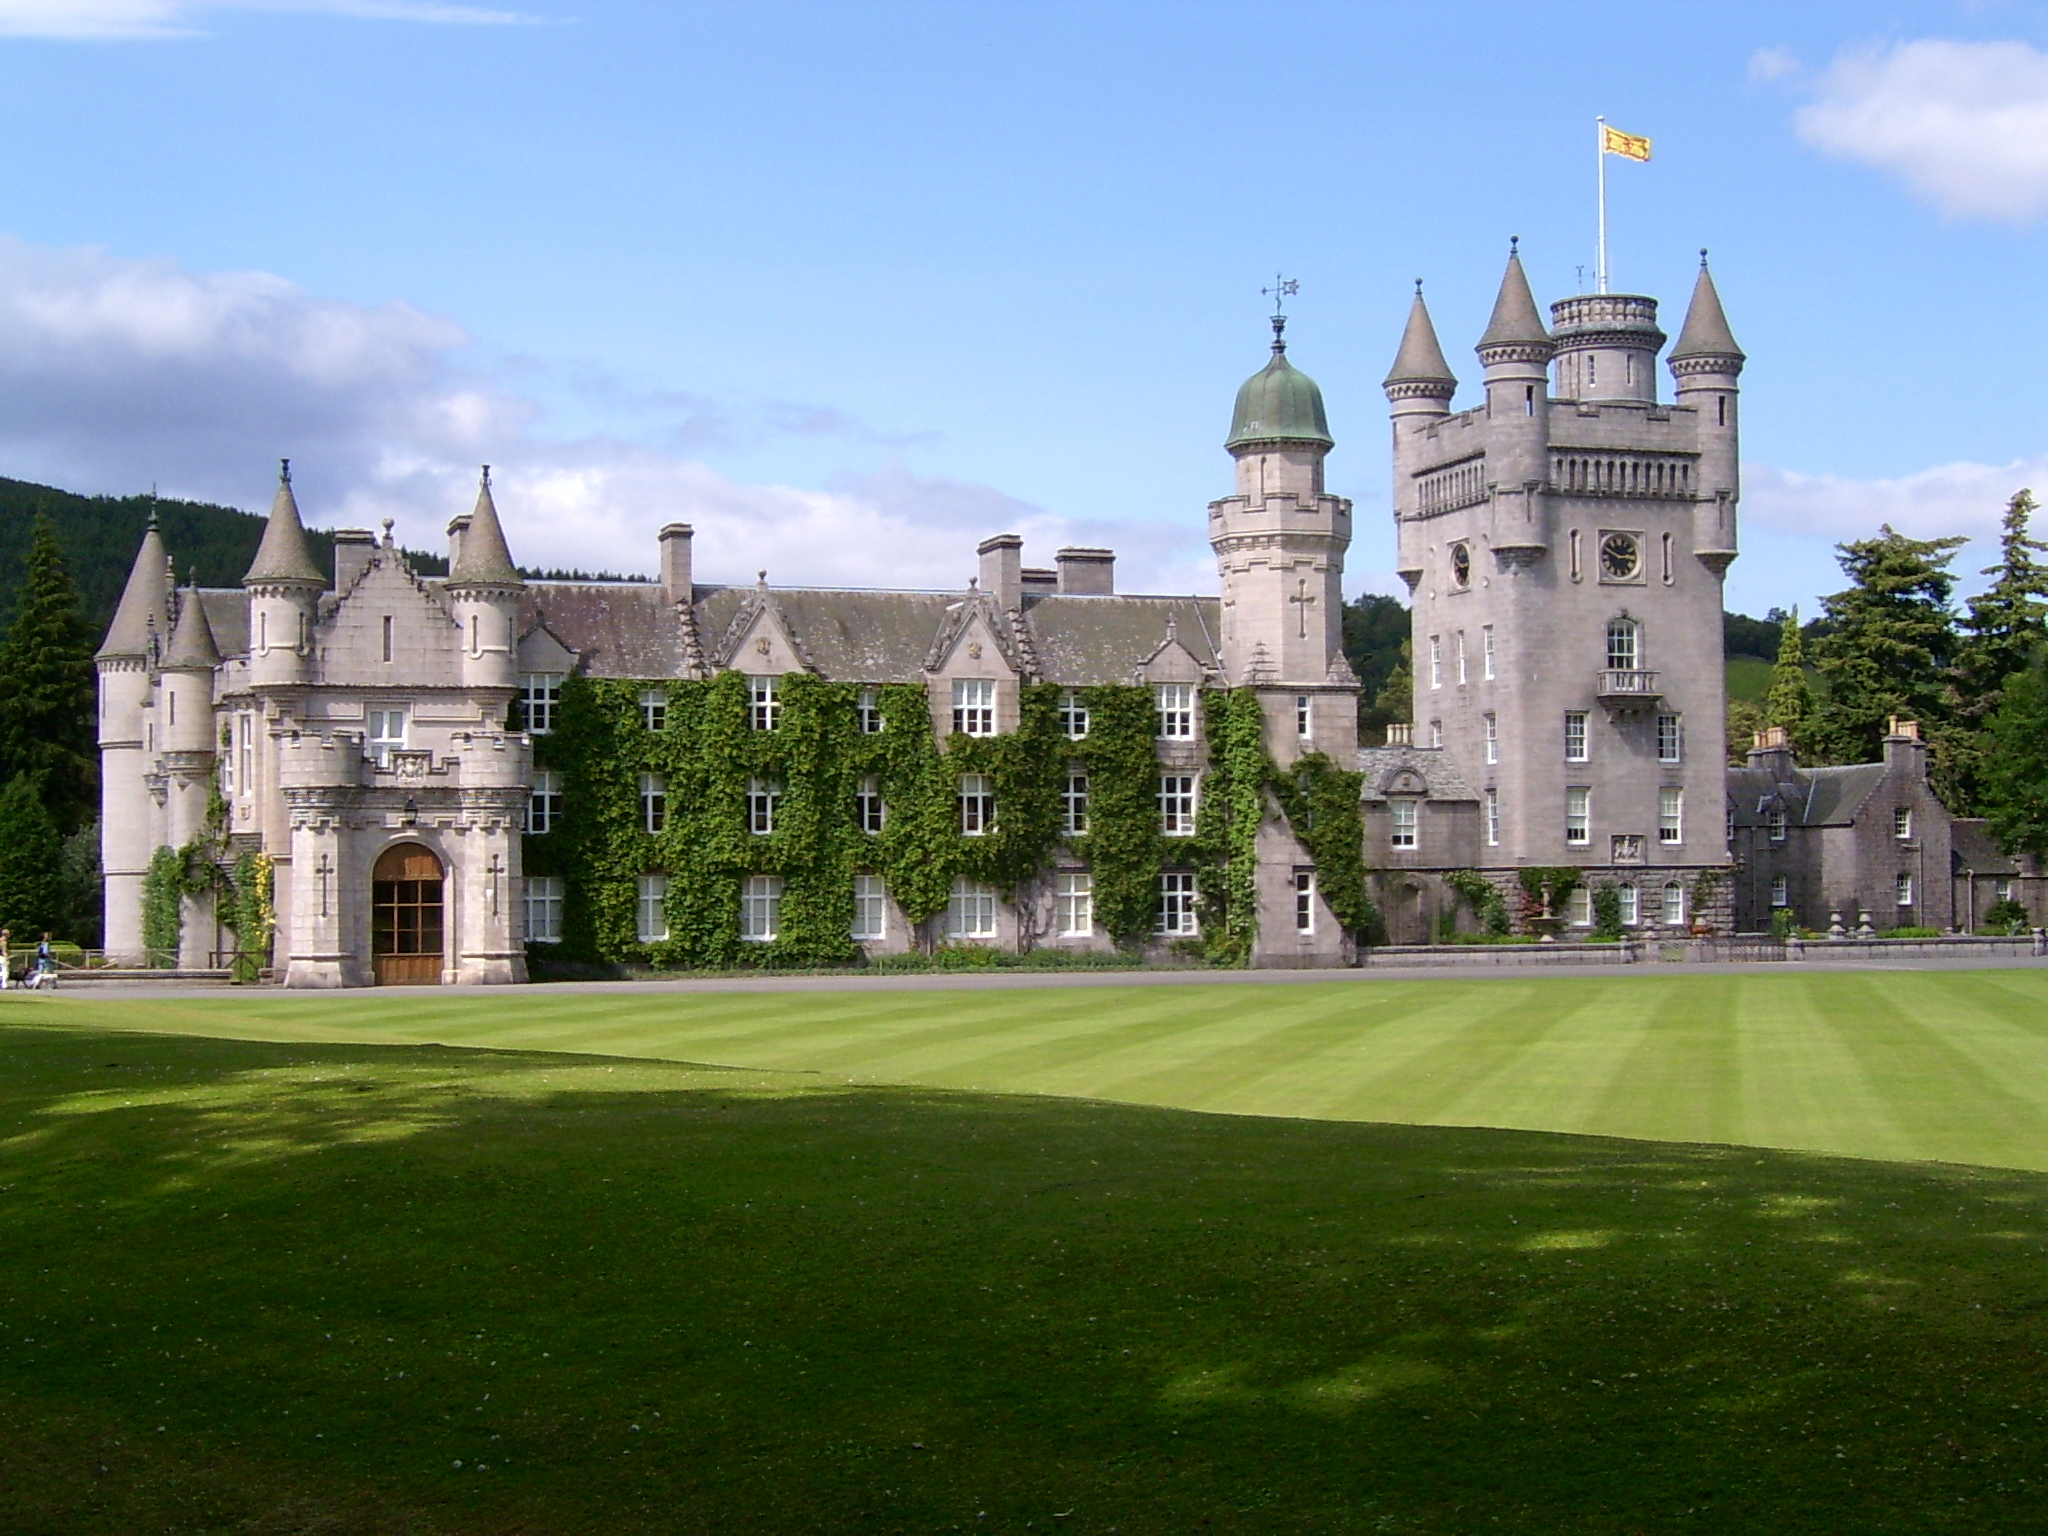 Balmoral Castle, holiday home of the Royals is a sight to behold. Don't miss it on your golf package scotland